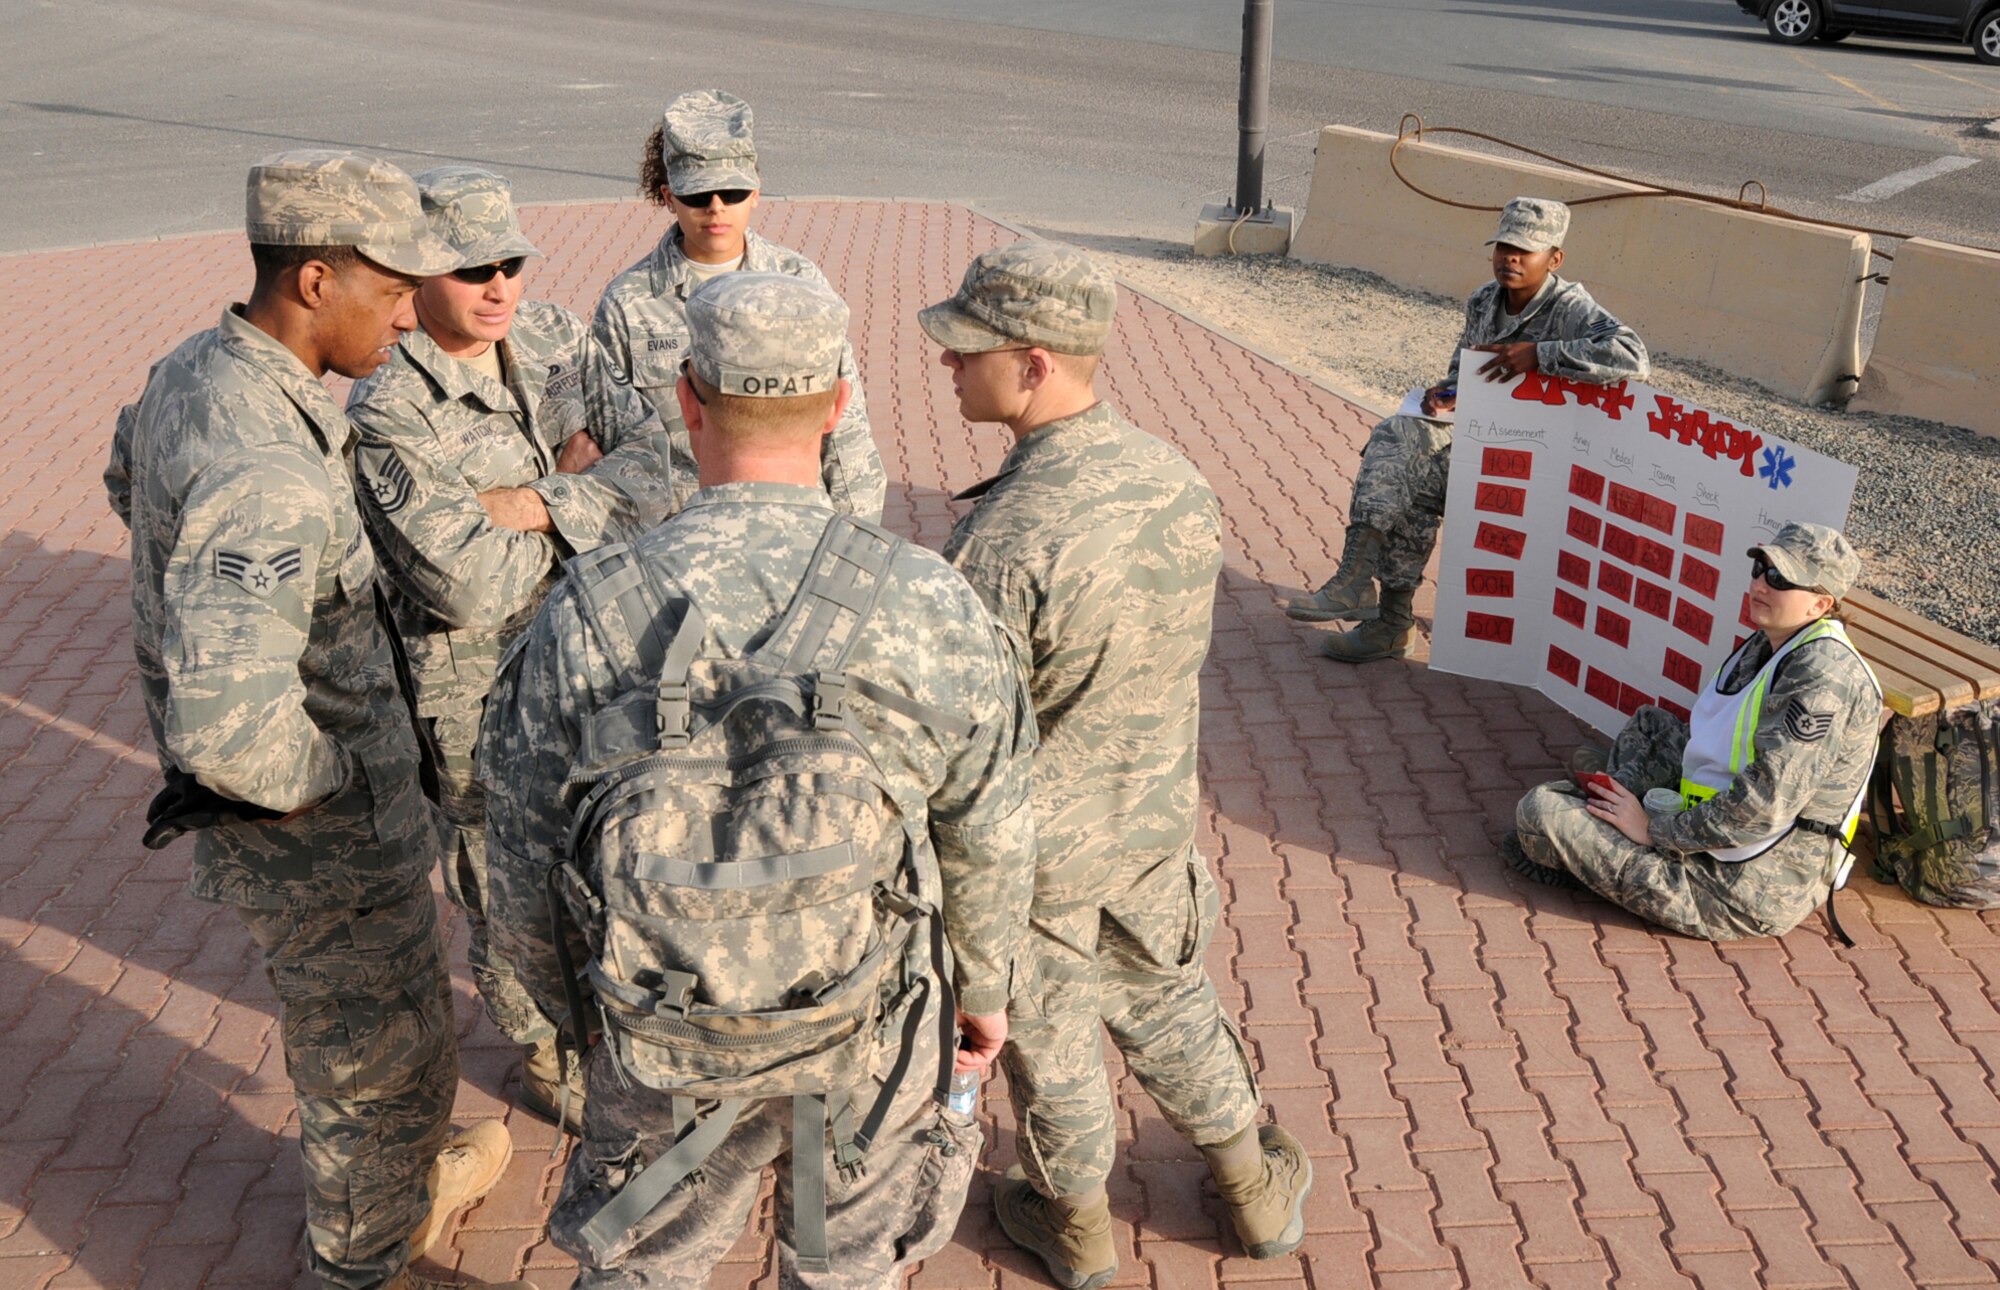 U.S. Airmen and a U.S. Soldier participate in medical jeopardy as part of an EMT Rodeo hosted by the 386th Expeditionary Medical Group in an undisclosed location, Southwest Asia, Feb. 18, 2012.  These emergency medical technicians participated in the competition to test their skills and knowledge in responding to different emergency situations alongside military and civilian EMT personnel from the Air Force, Army, and Navy. (U.S. Air Force photo by Staff Sgt. James Lieth/Released)